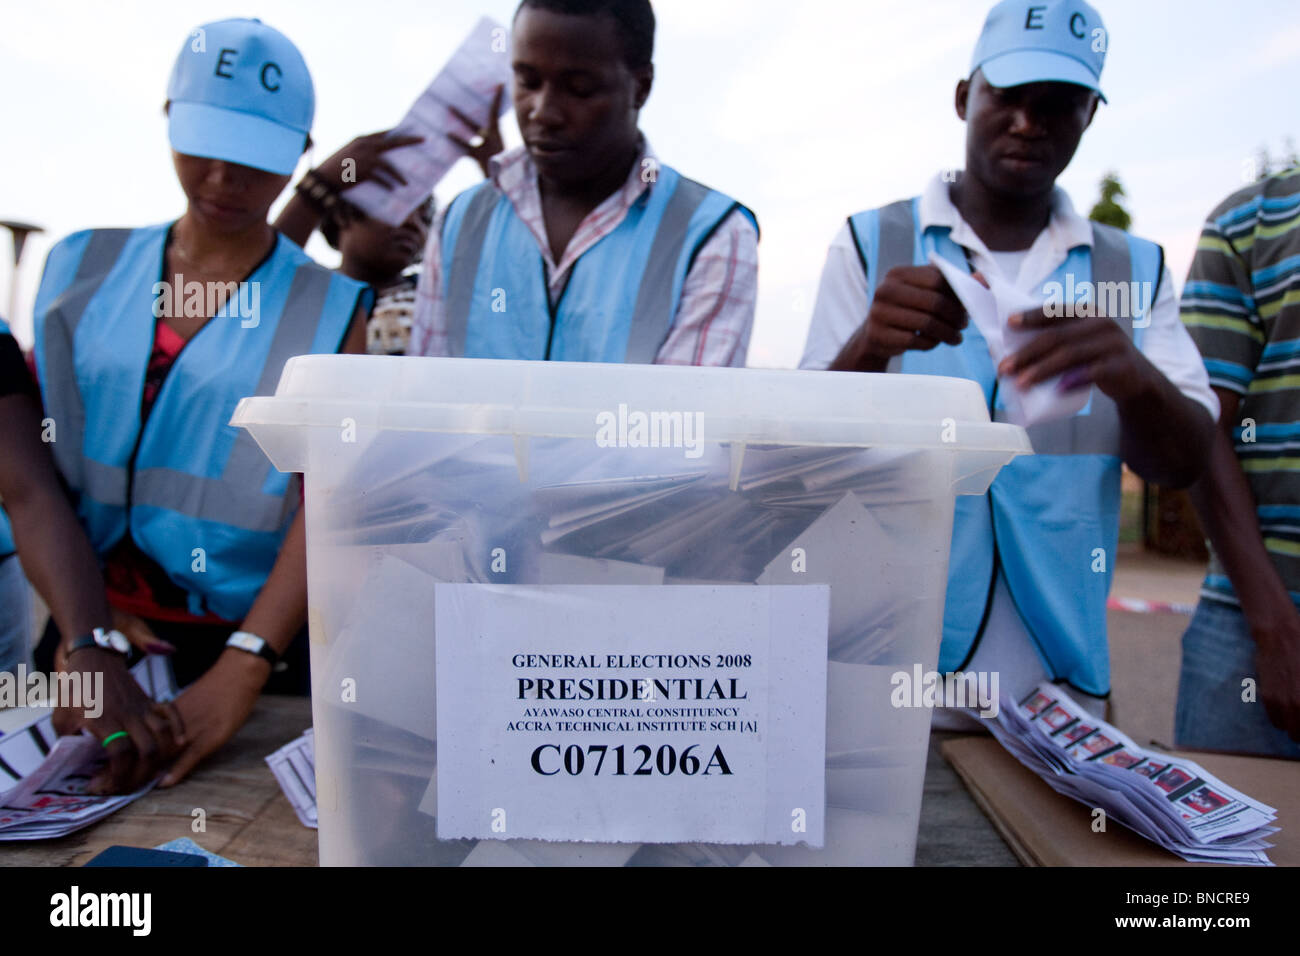 Electoral commission workers count ballots after the first round of presidential elections in Accra, Ghana Stock Photo